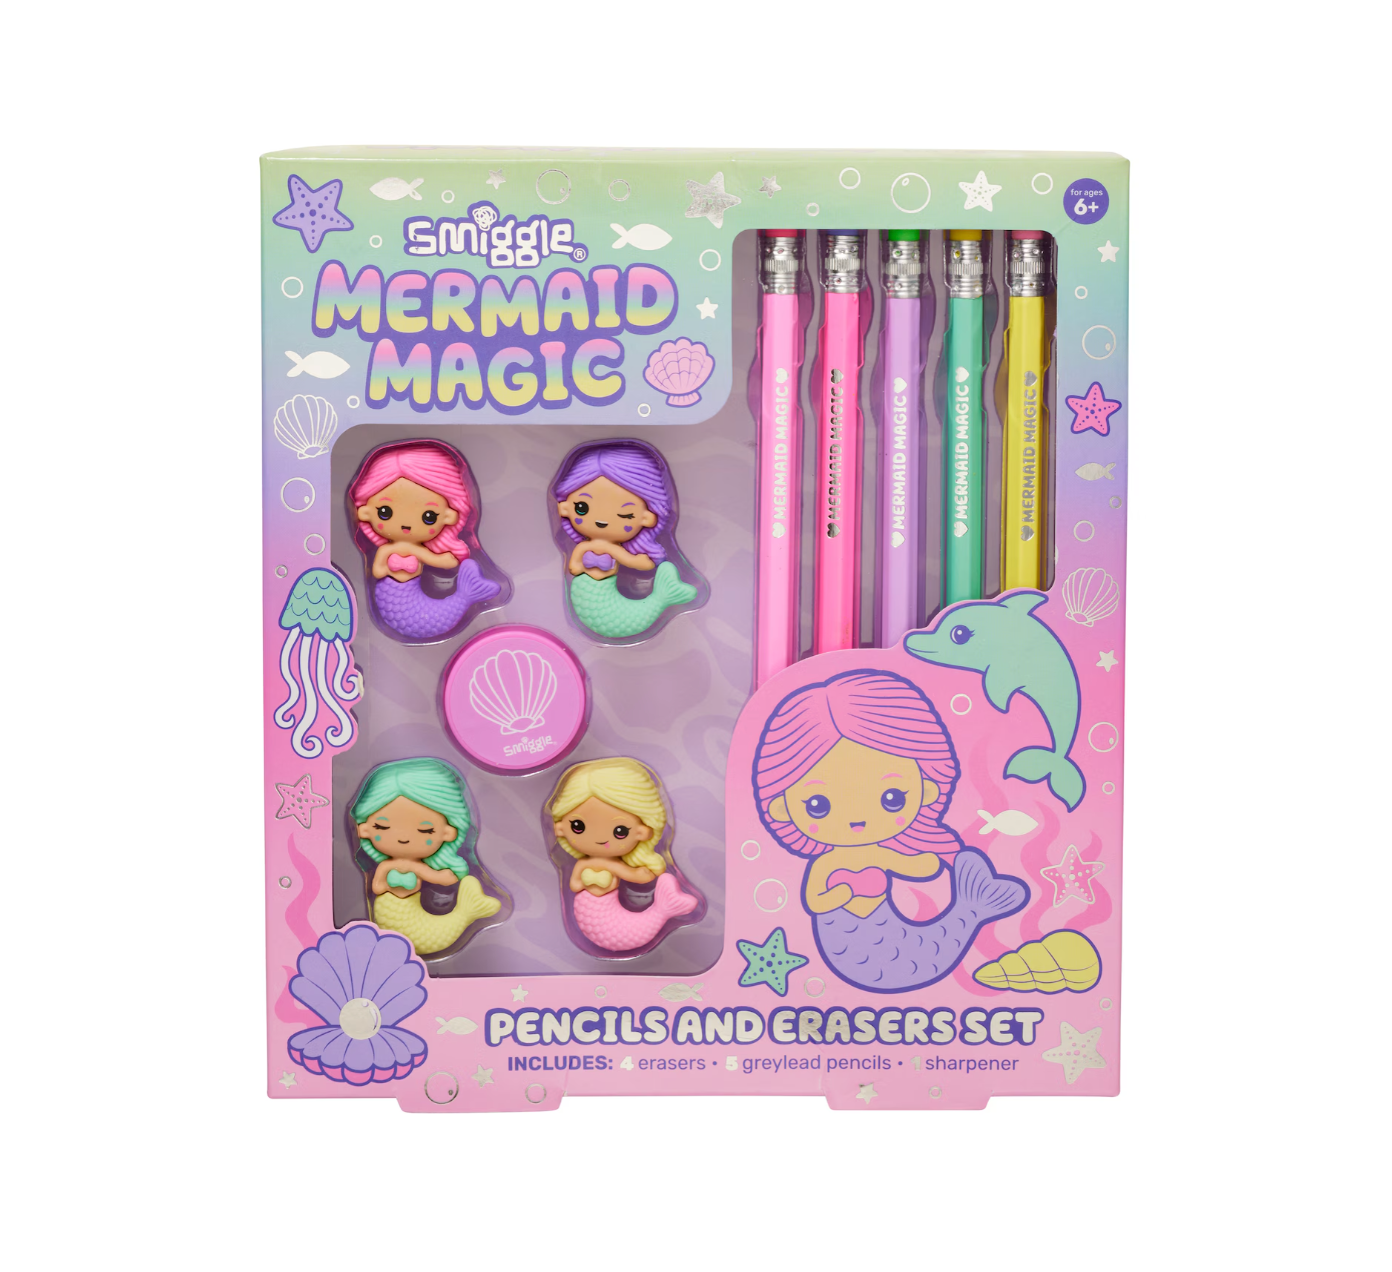 Smiggle Mermaid Eraser and Pencil Gift Pack